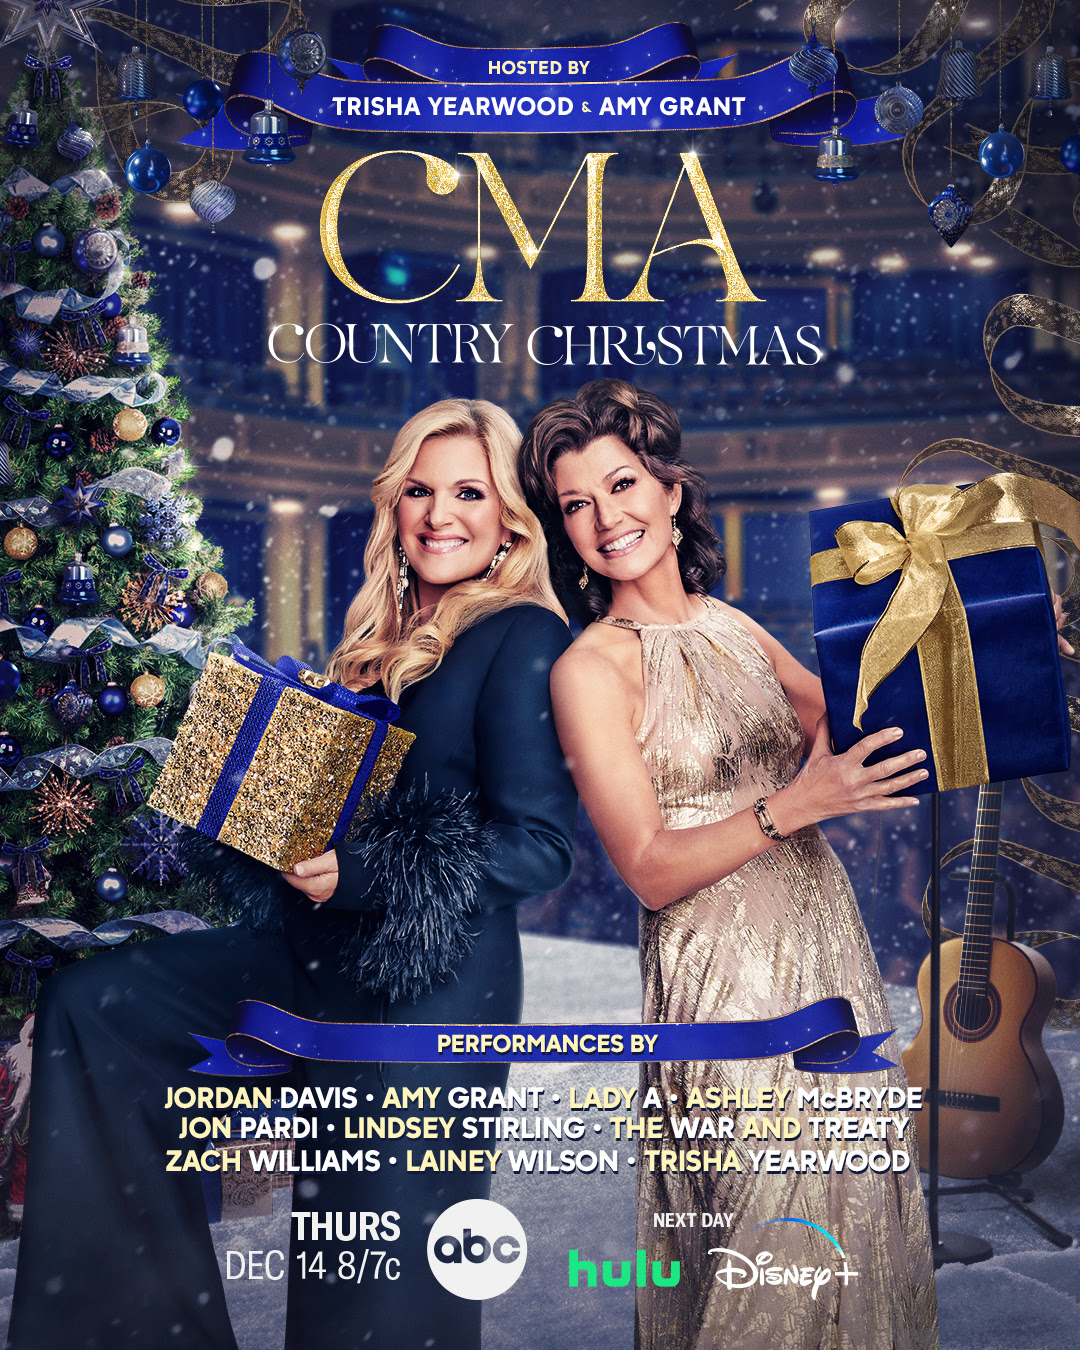 Trisha Yearwood and Amy Grant Tapped to Host 14th Annual CMA Country Christmas